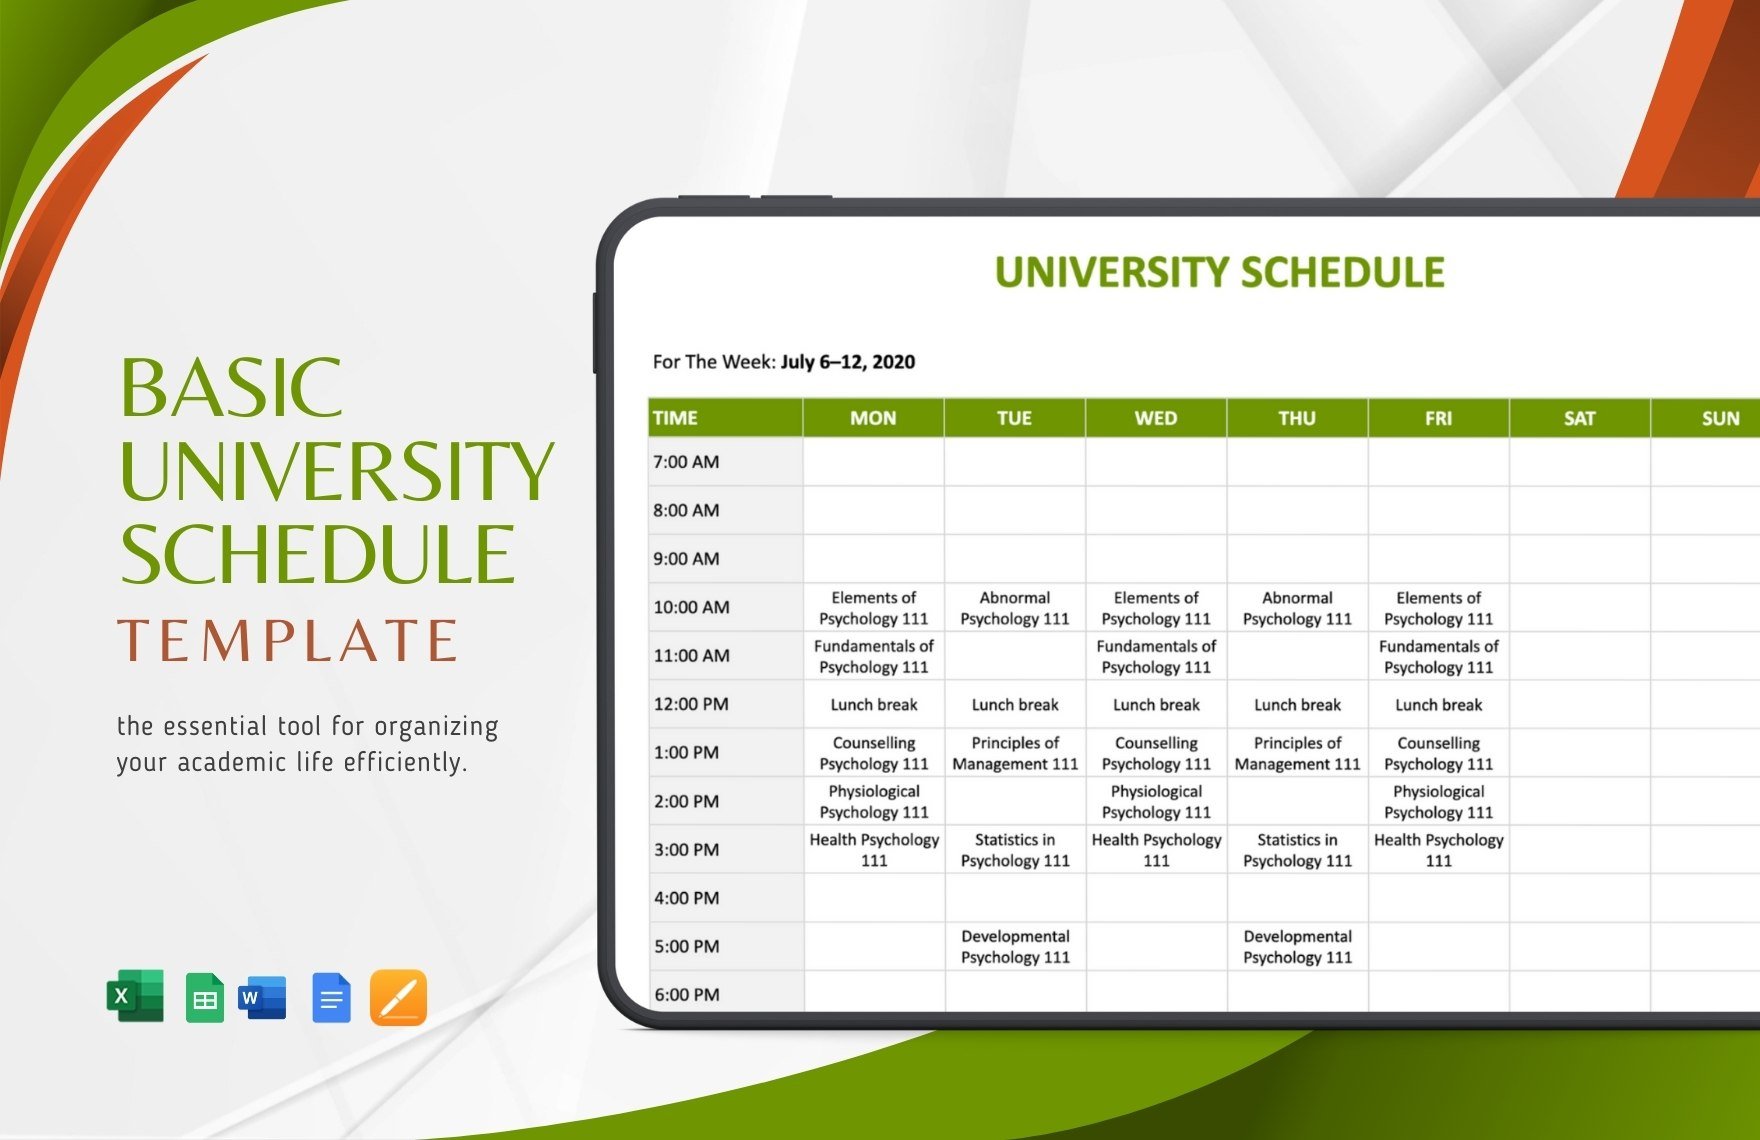 Basic University Schedule Template in Word, Google Docs, Excel, Google Sheets, Apple Pages